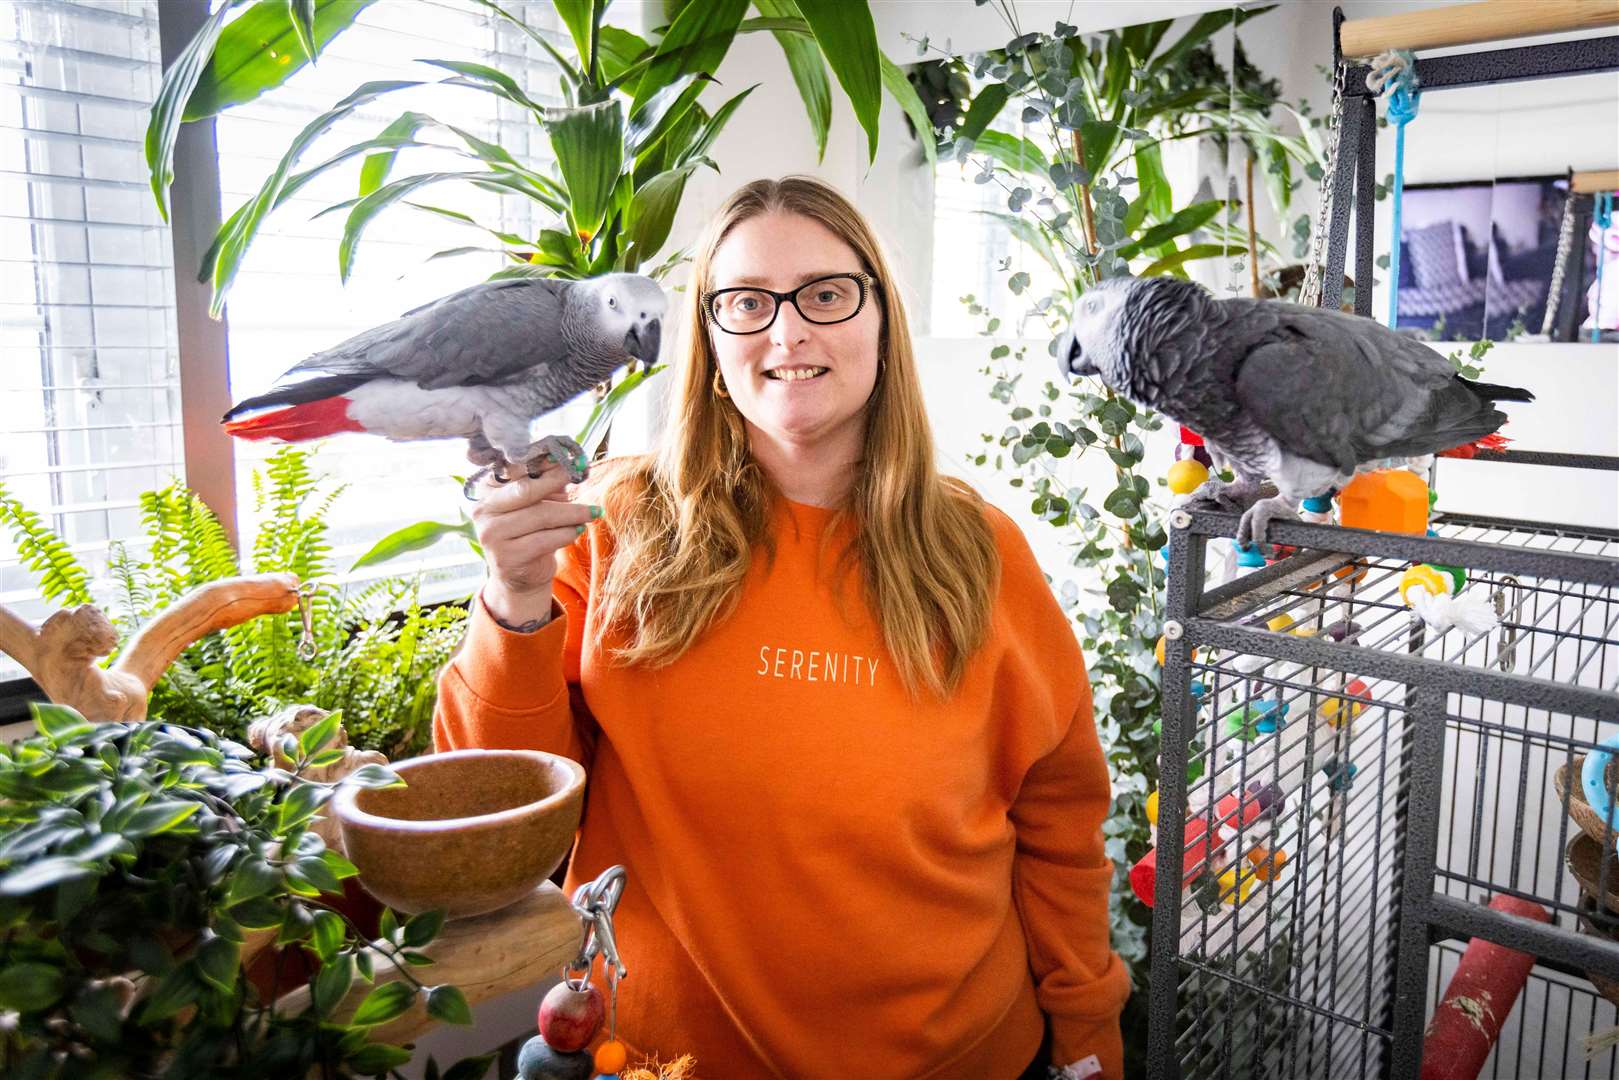 Lesley Herbert with her pet African grey parrots, Alfie and Sonny, in their own room in her Basingstoke home (Camelot/PA)